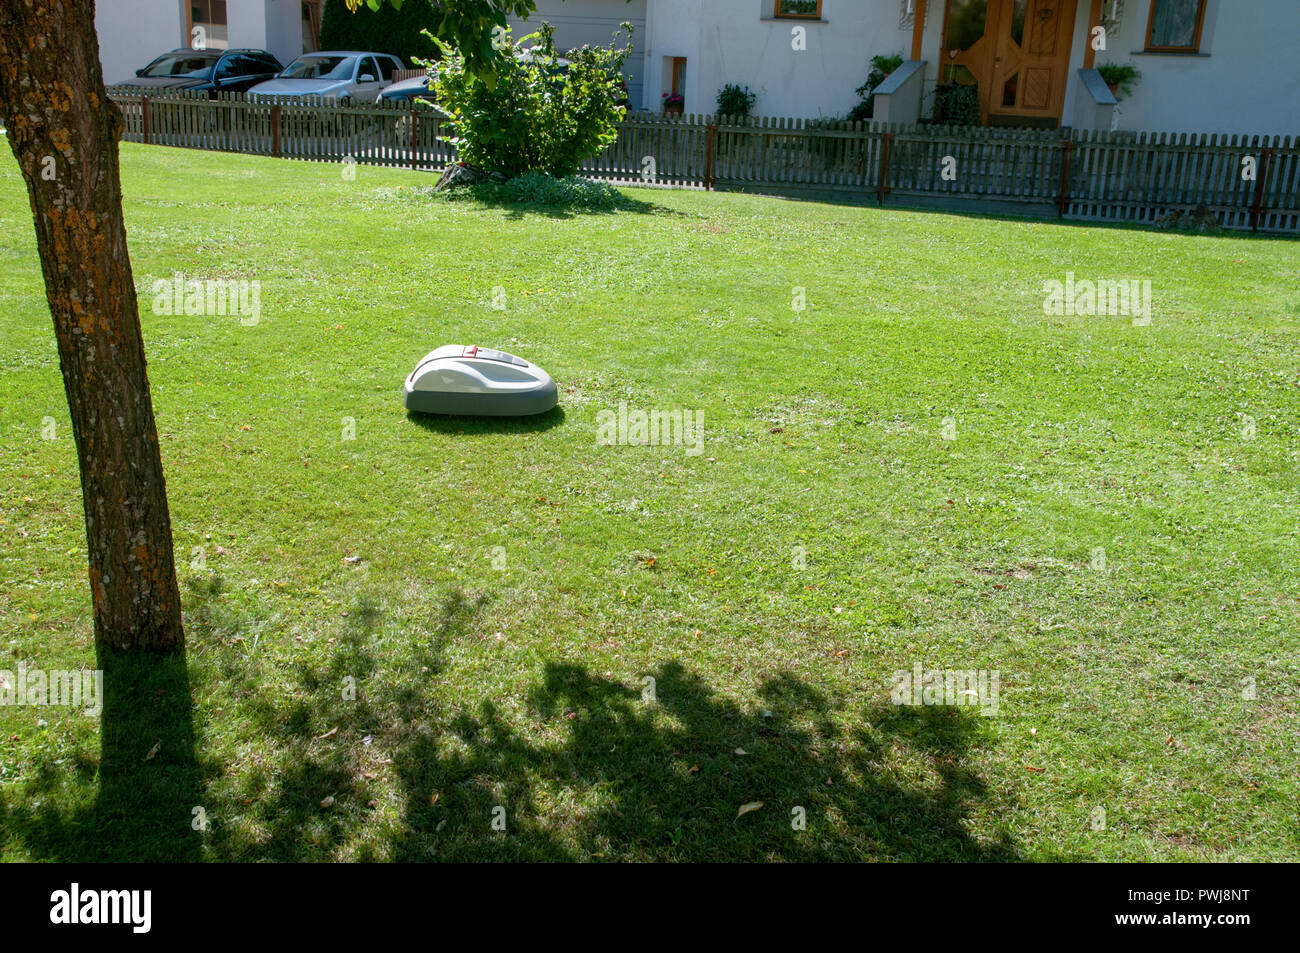 battery powered robotic lawn mower cutting grass Stock Photo